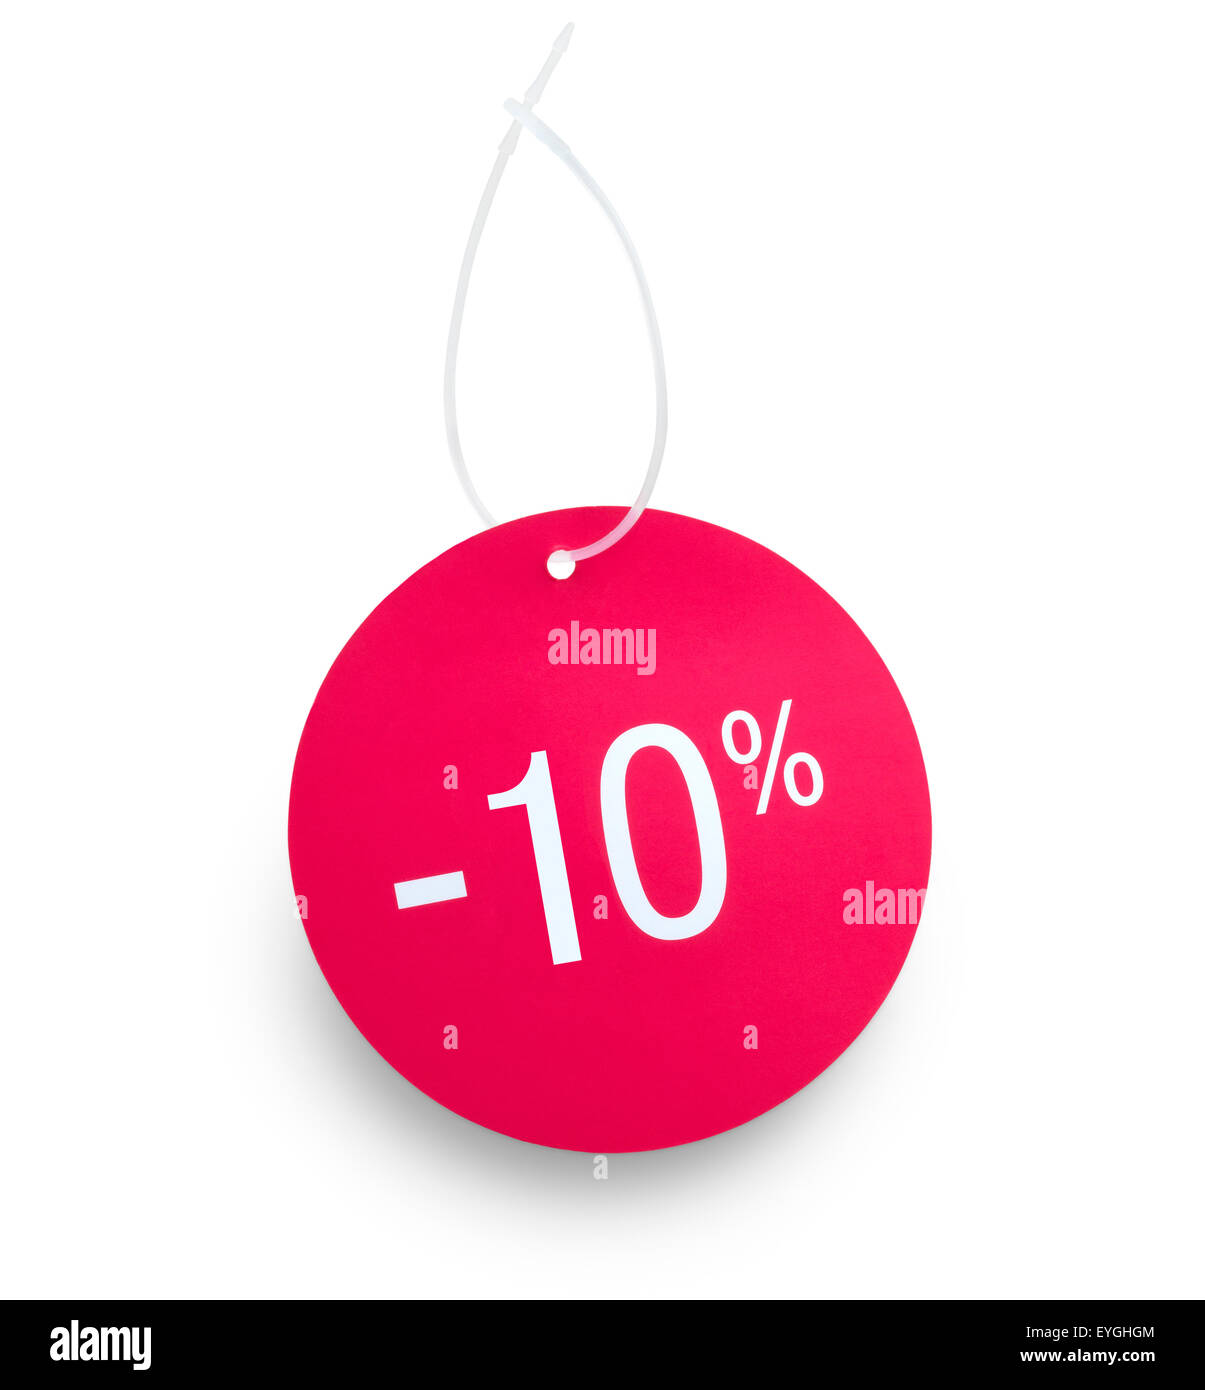 Discount tag. 10% off against white background. Clipping path on tag and hanger tape Stock Photo